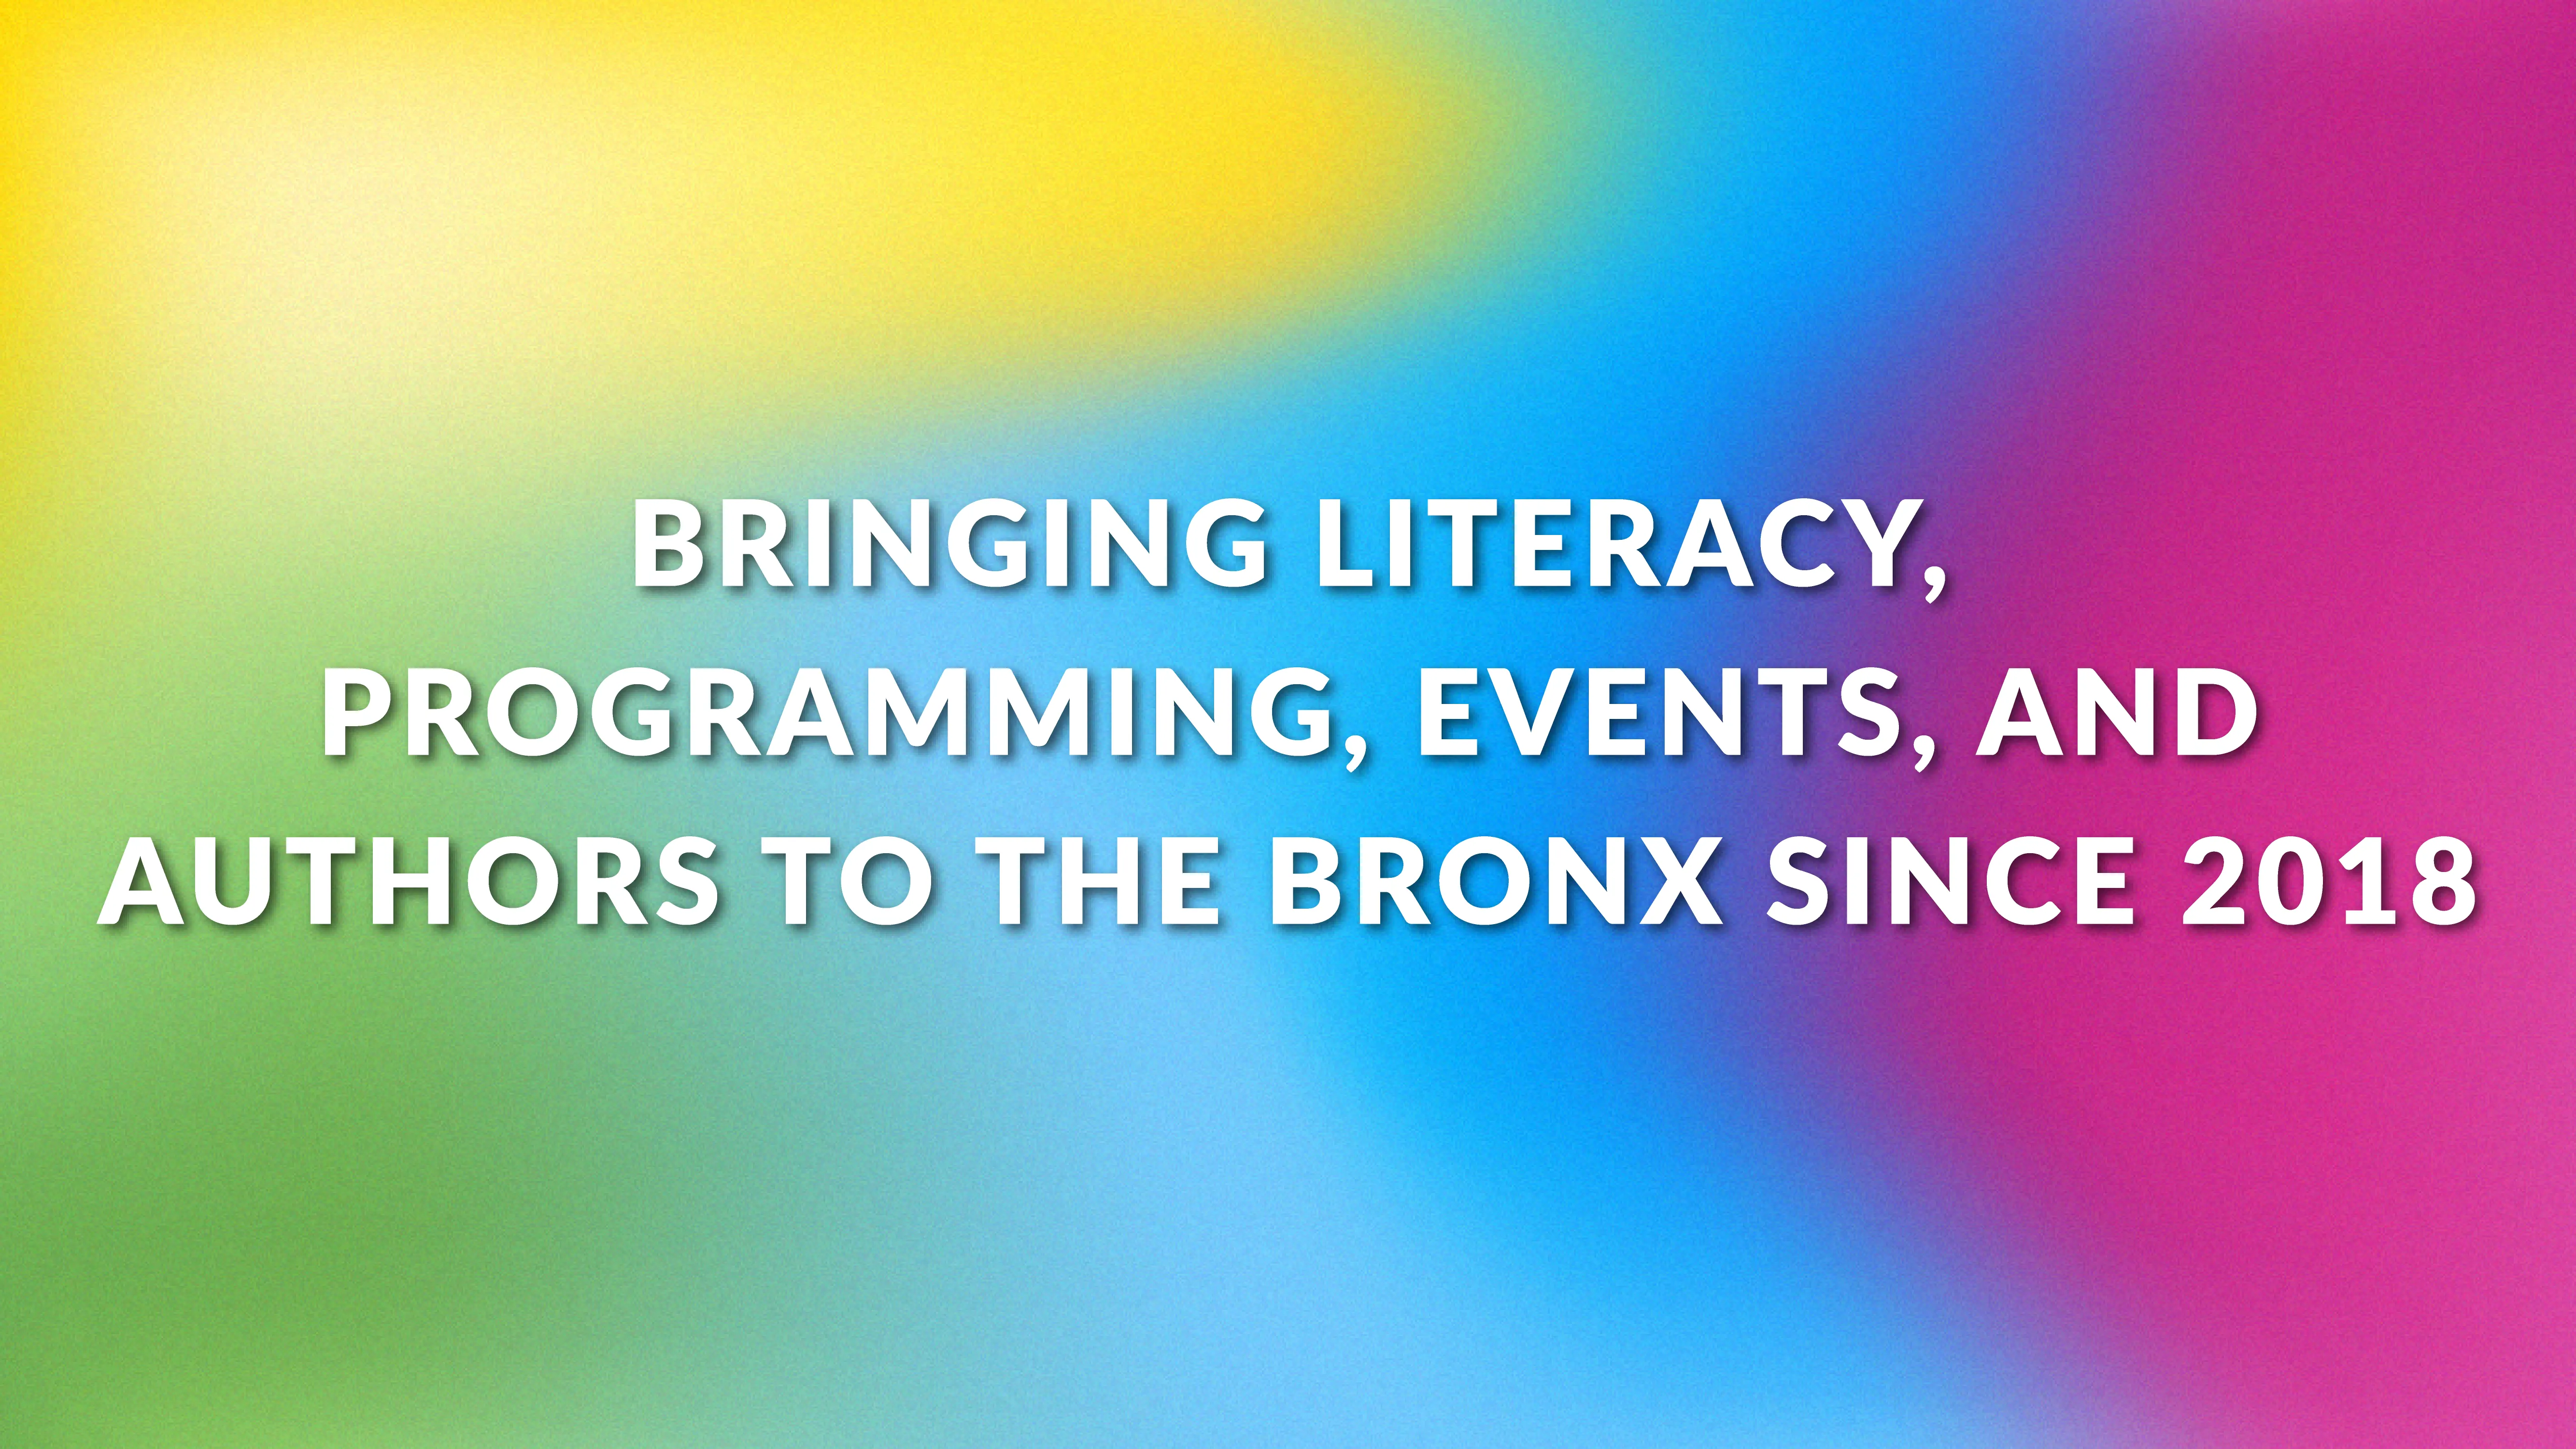 Bringing literacy, programming, events, and authors to the Bronx since 2018